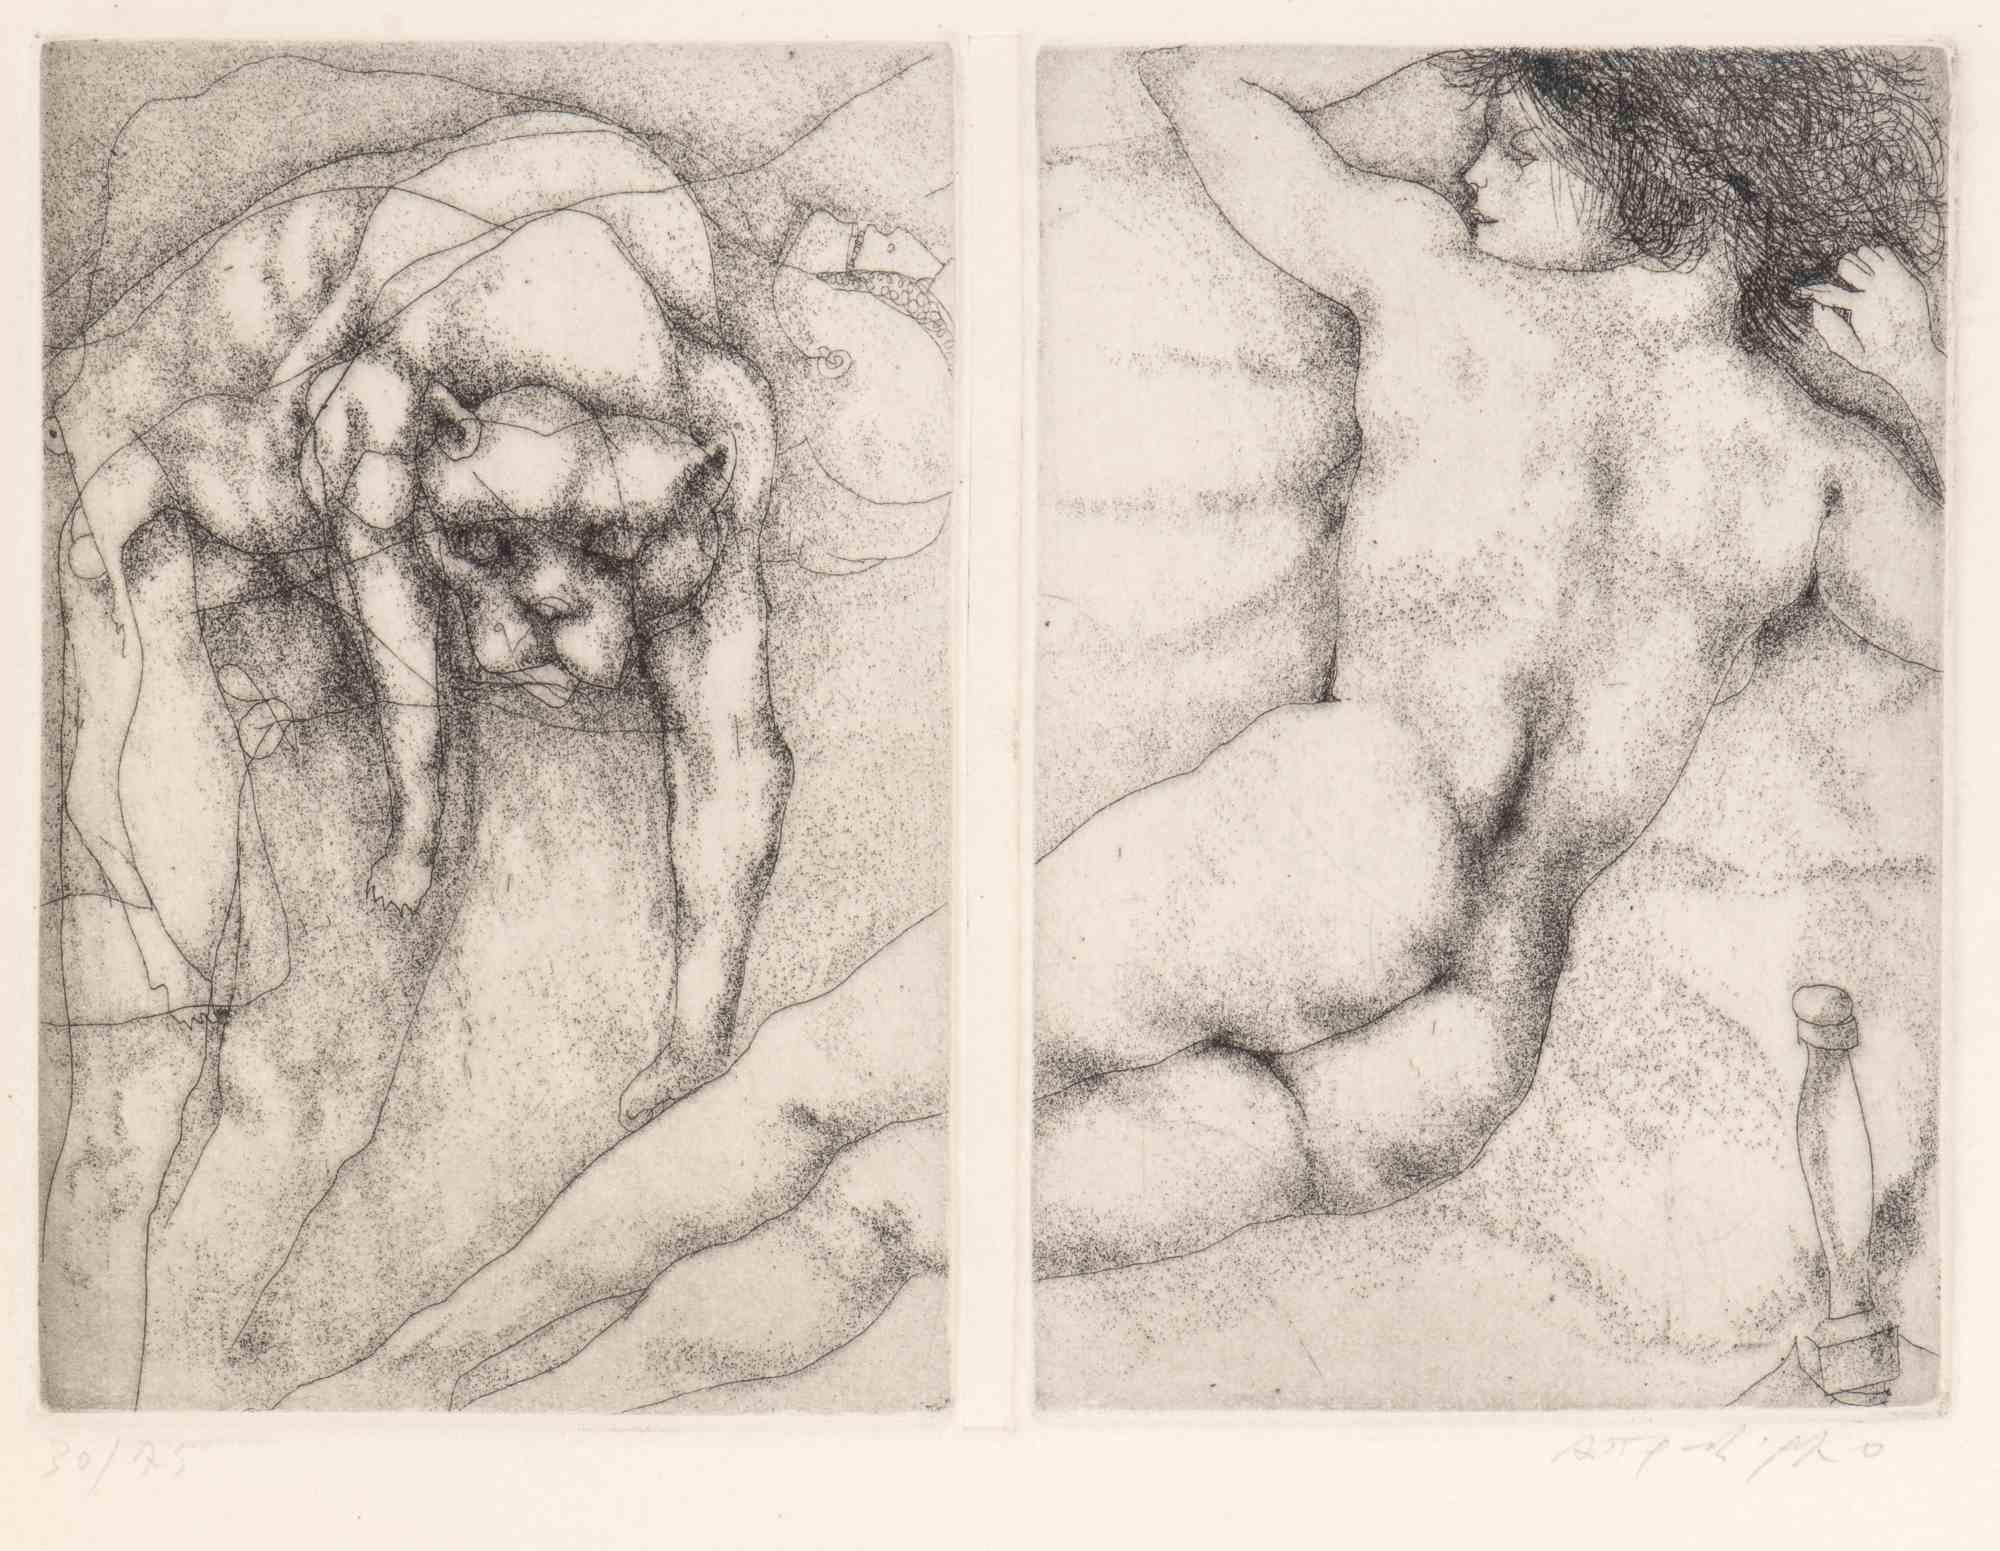 Complete Portfolio of 18 Etchings by Ugo Attardi - 1970s For Sale 2